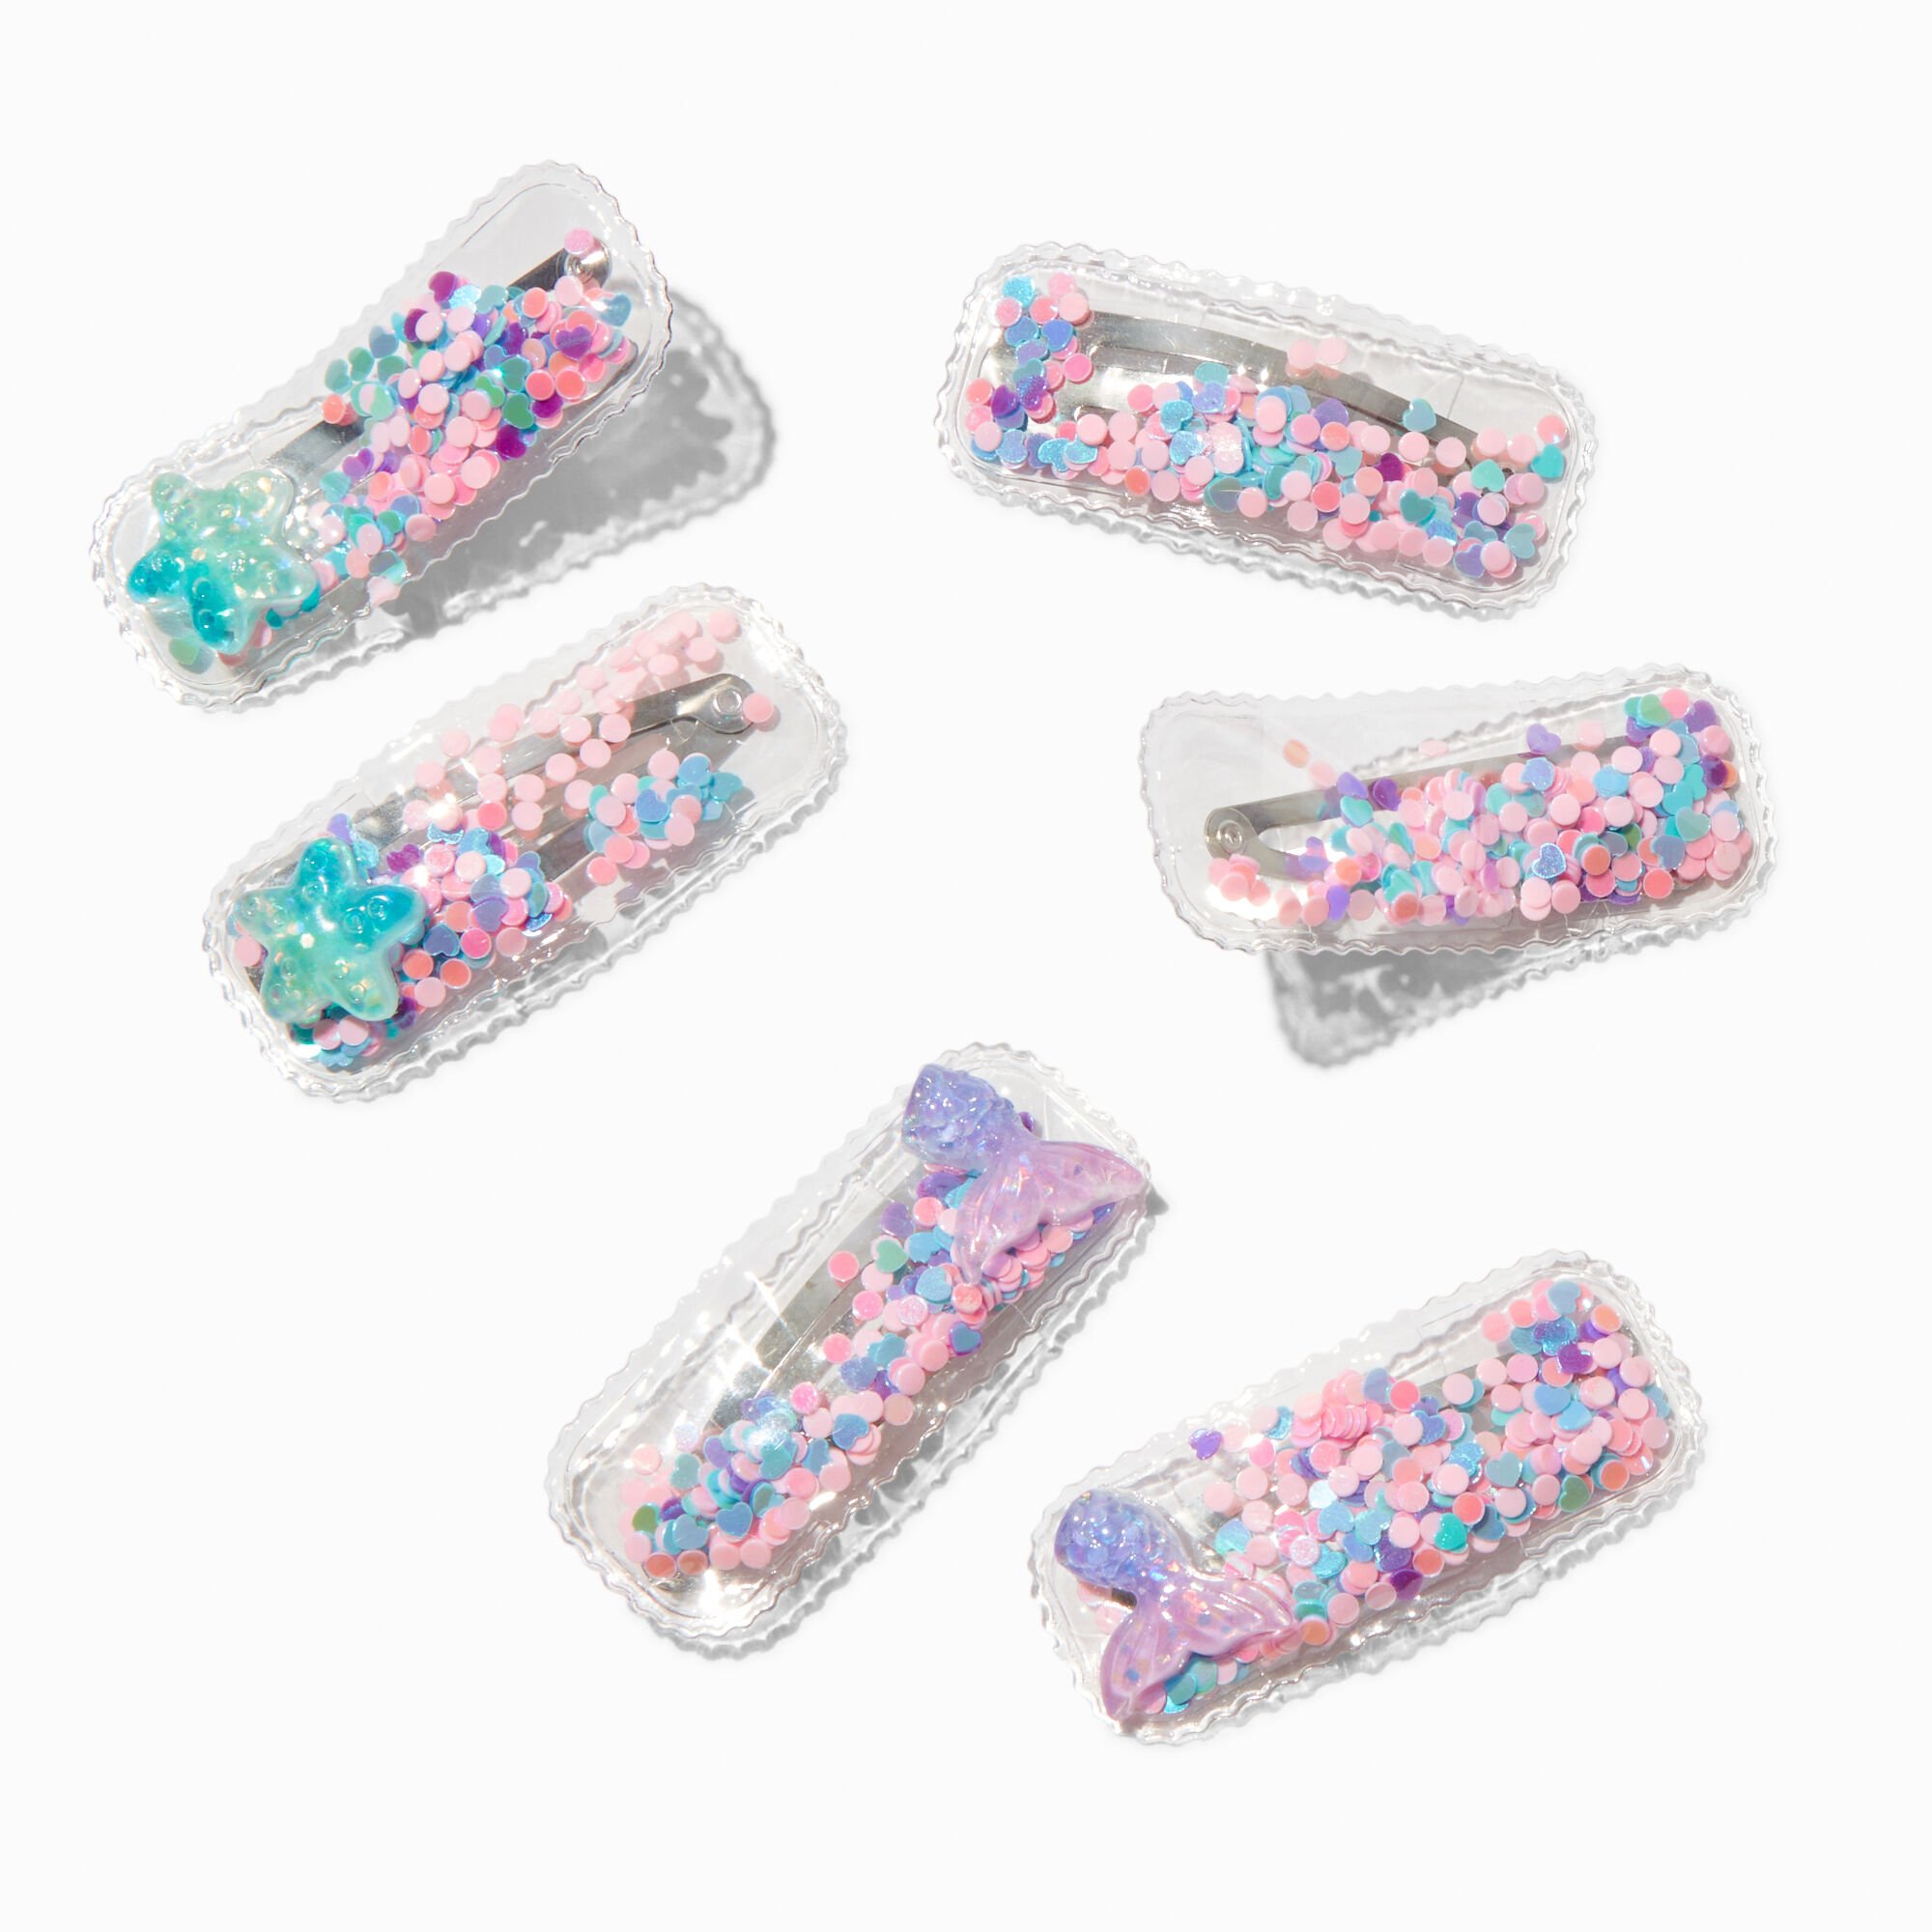 View Claires Club Mermaid Shaker Square Snap Hair Clips 6 Pack information